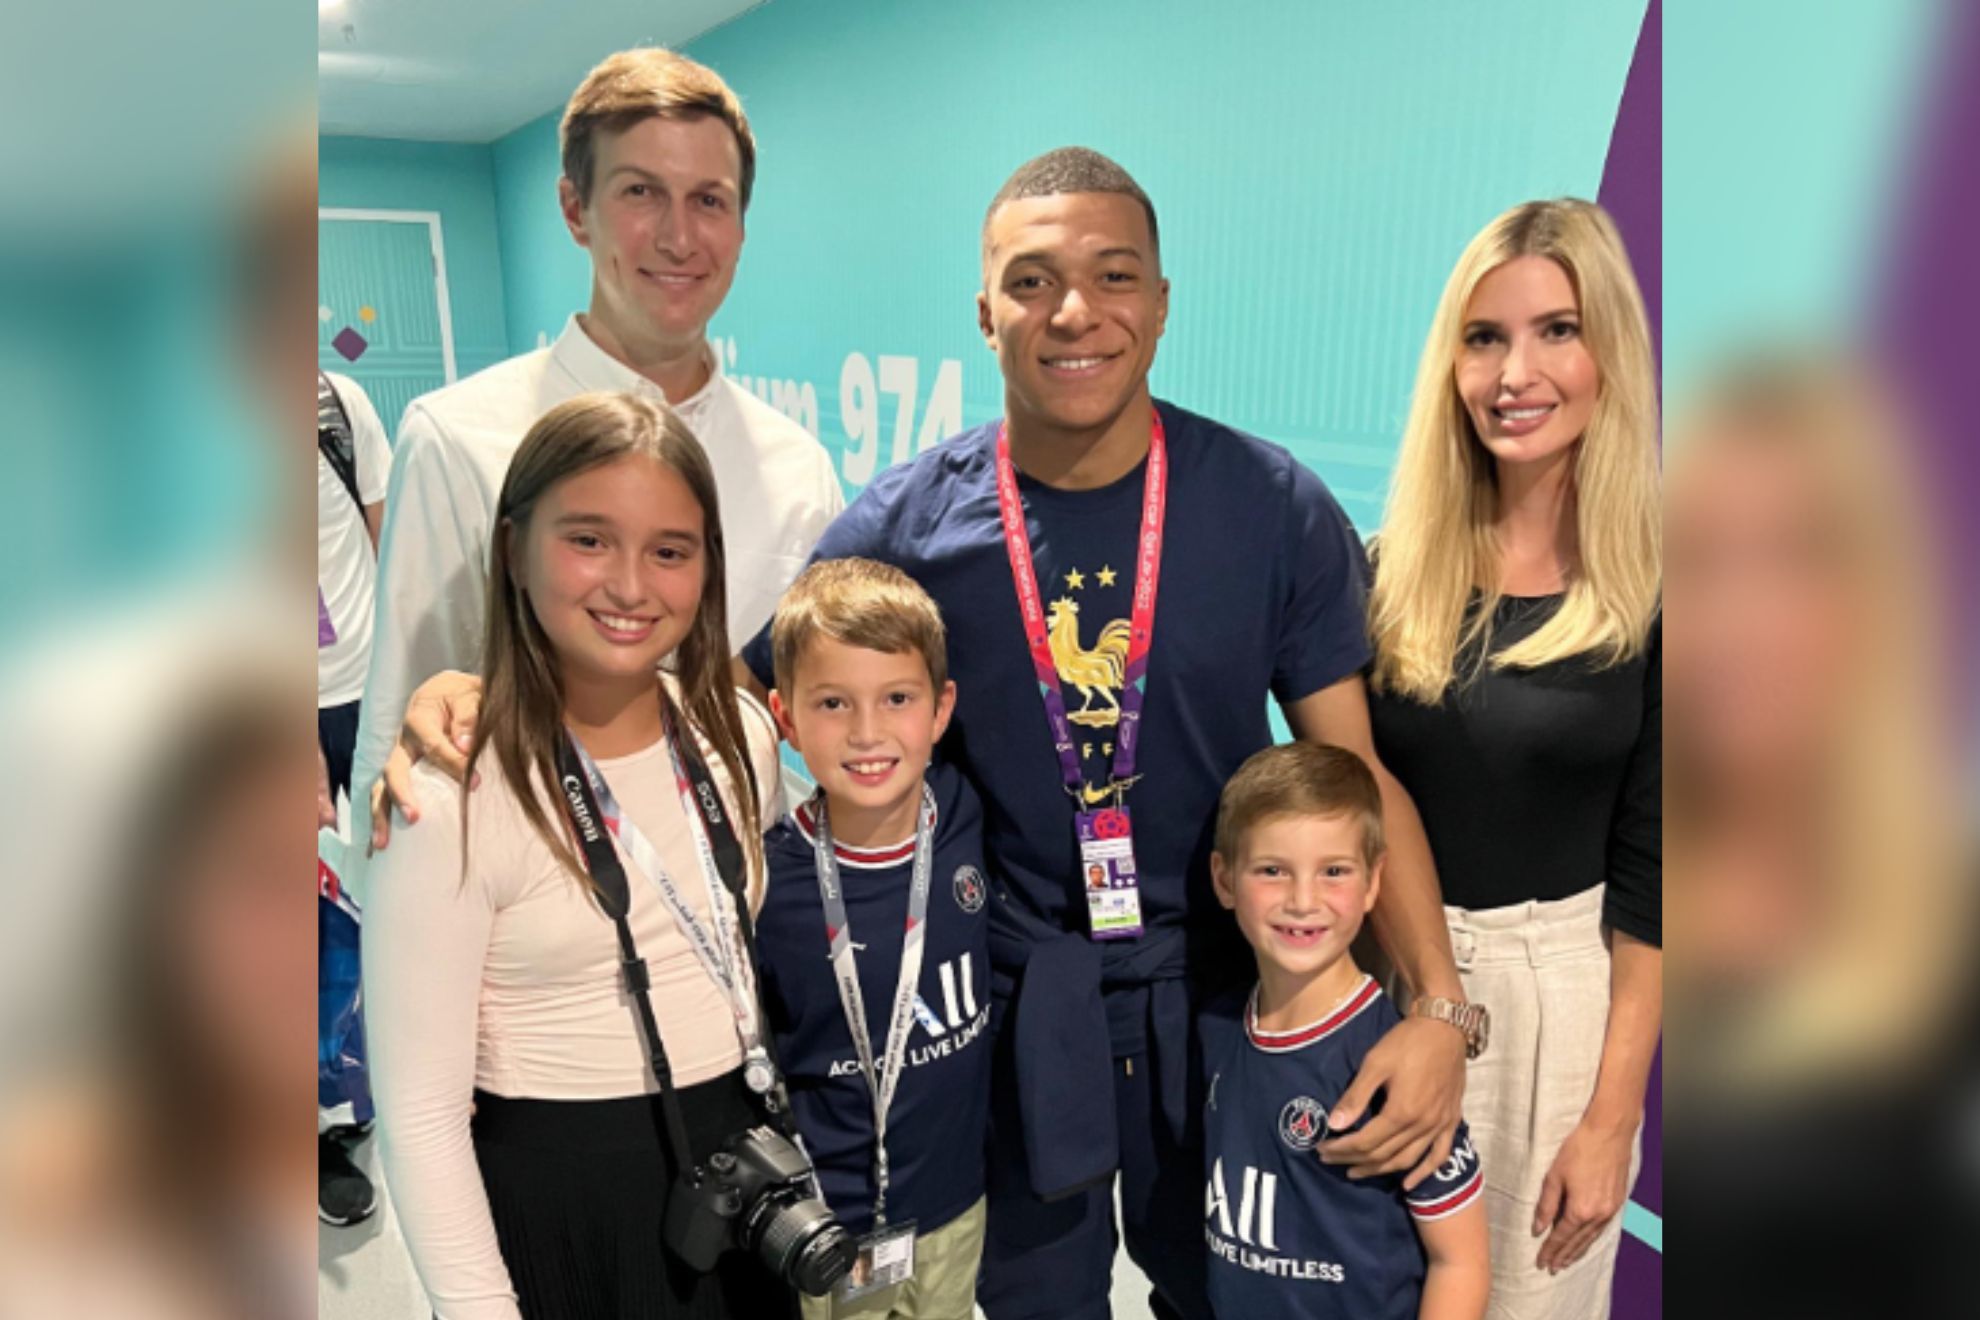 Kylian Mbappe poses for a photo with Ivanka Trump, Jared Kushner and their three children